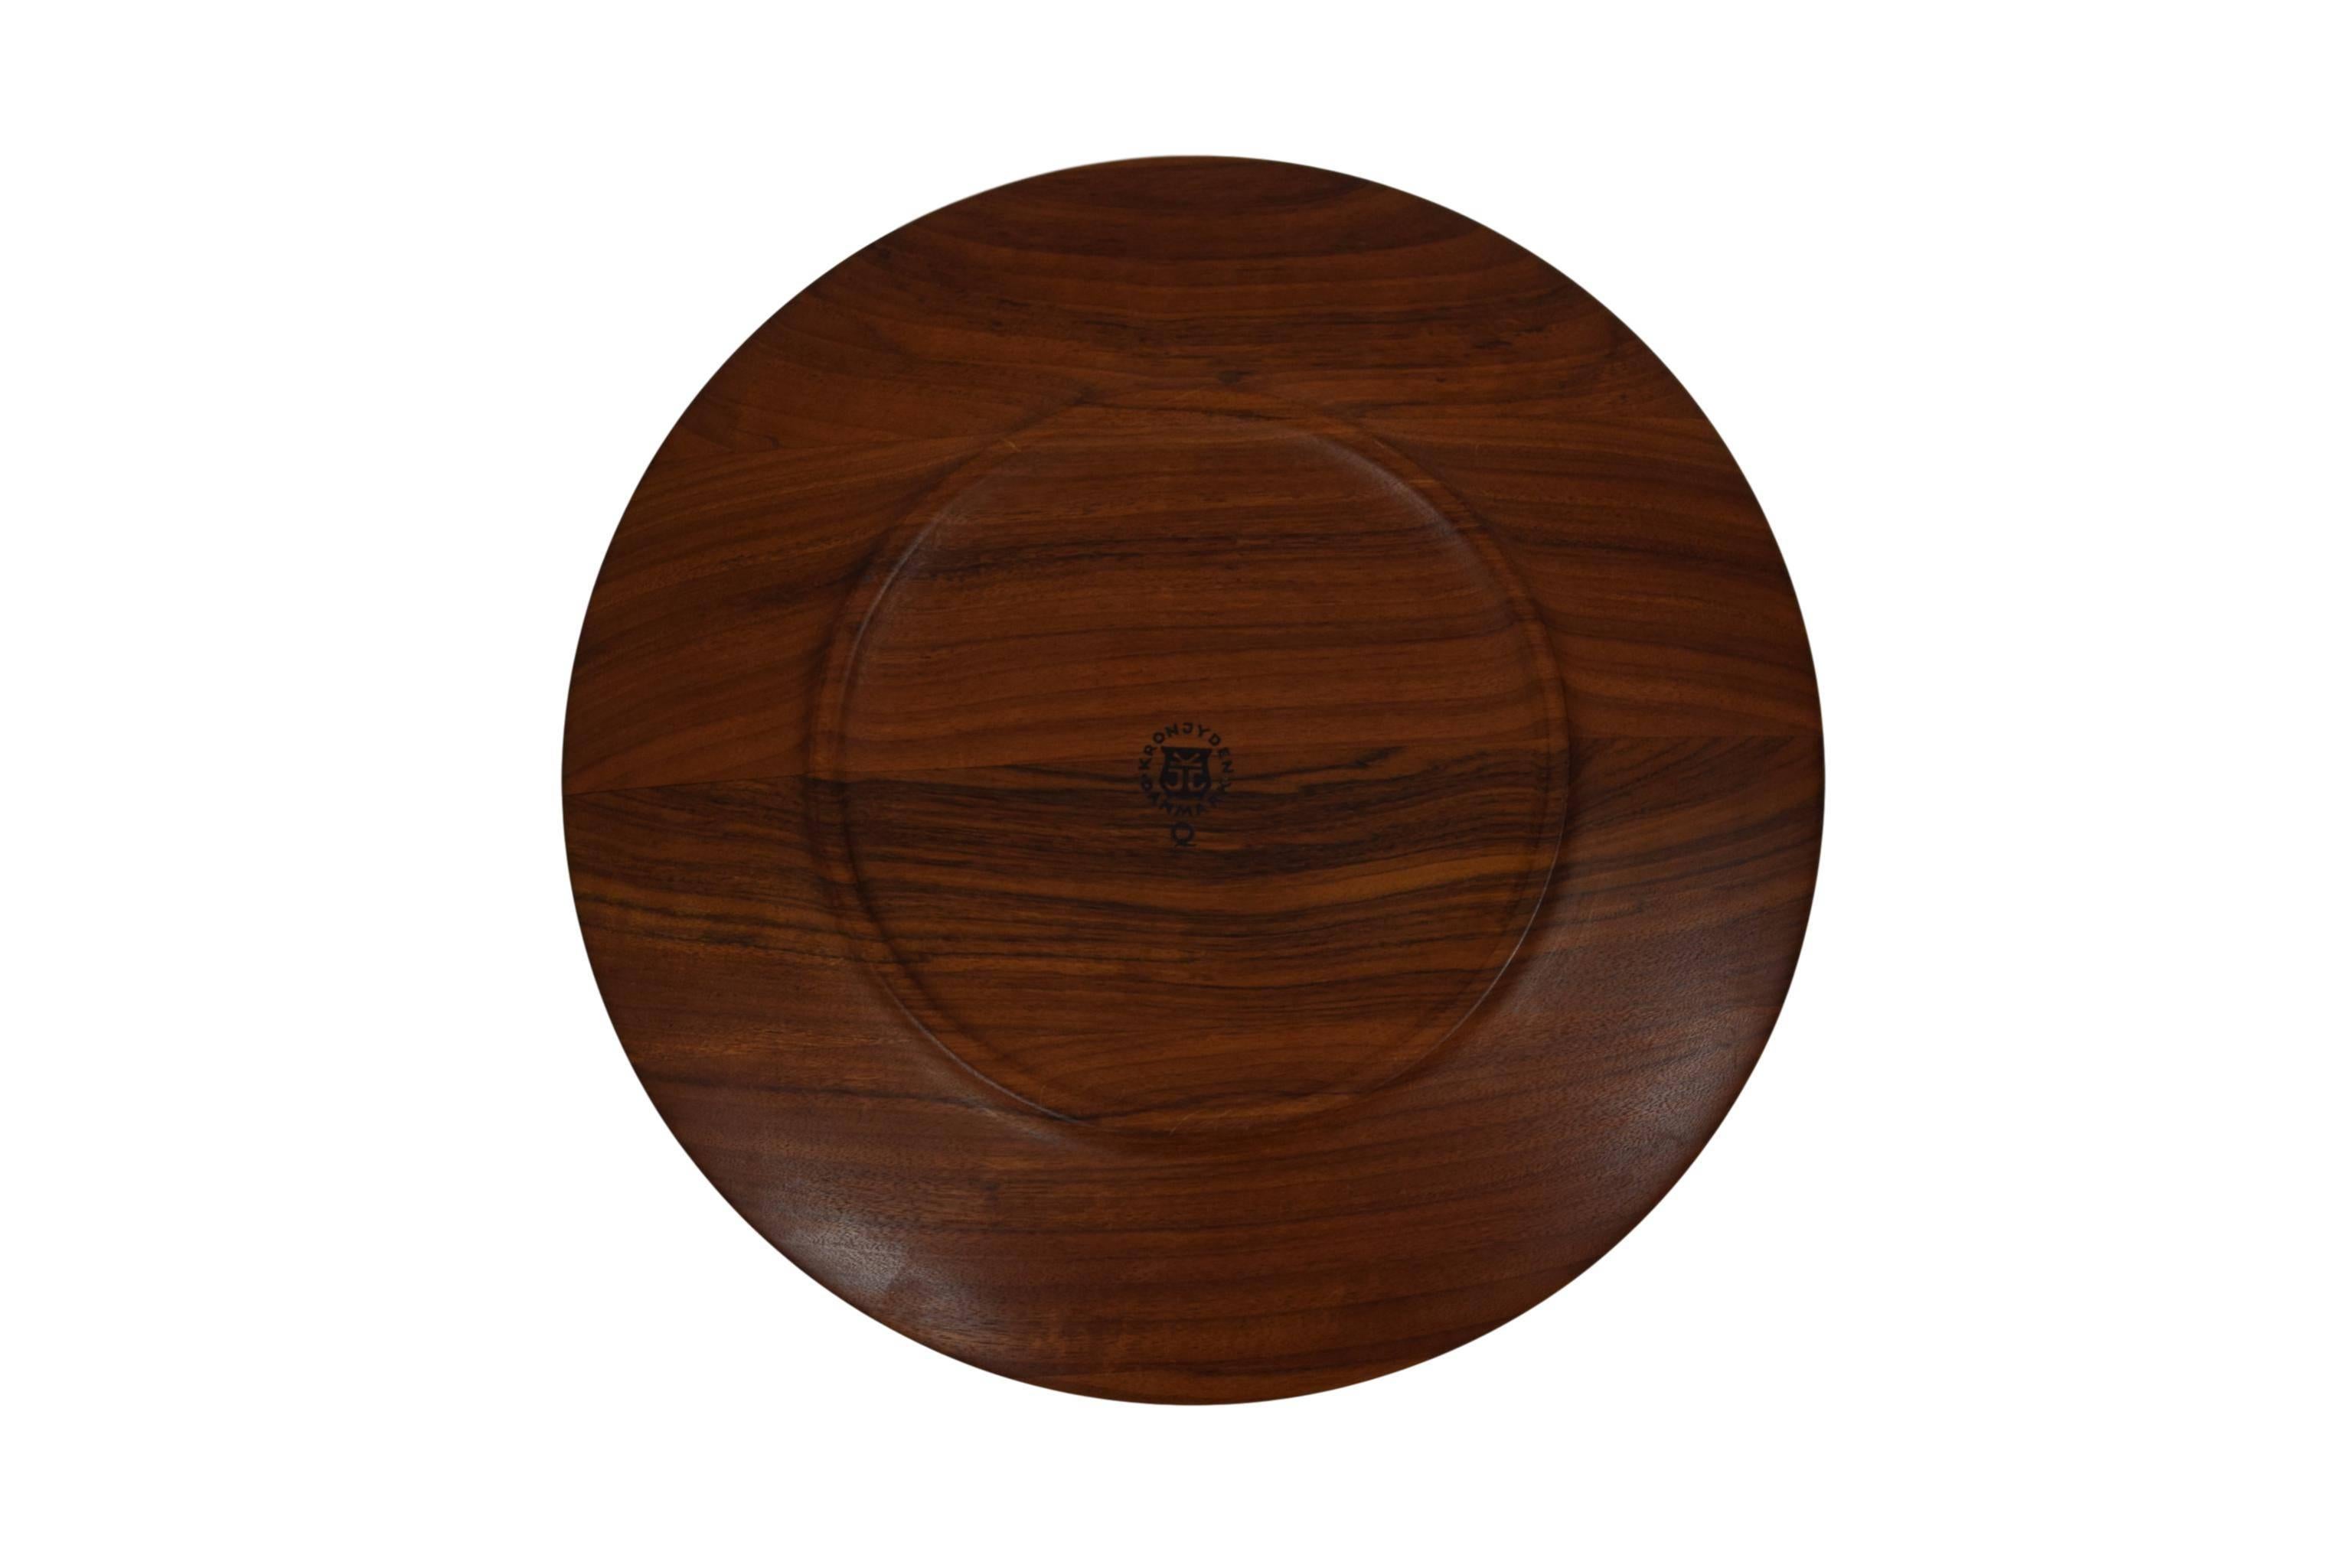 A Danish midcentury cover plate by Jens Harald Quistgaard (1919-2008). Produced by Kronjyden. Made from teak.

Stamped 